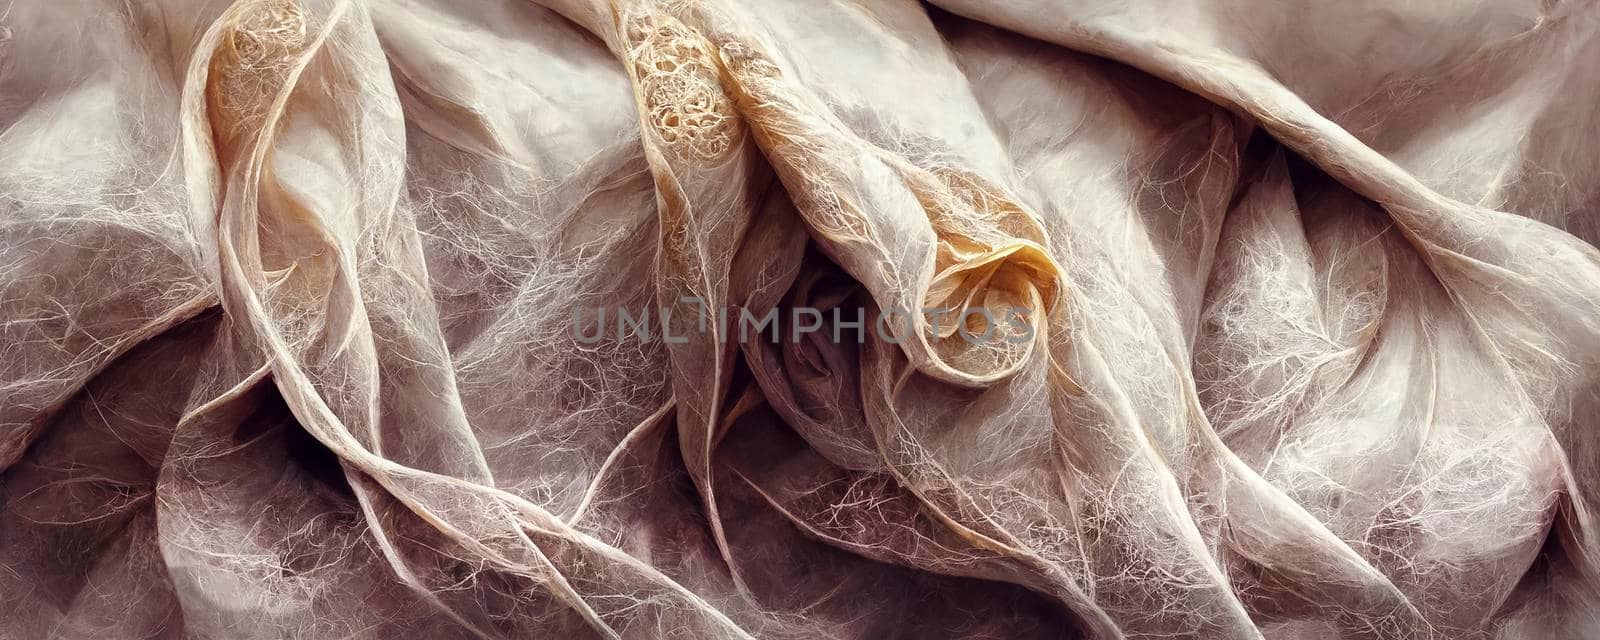 Silk wavy composition. Abstract texture of silk chiffon fabric in champagne color. Silk fabric mockup as artistic layout background